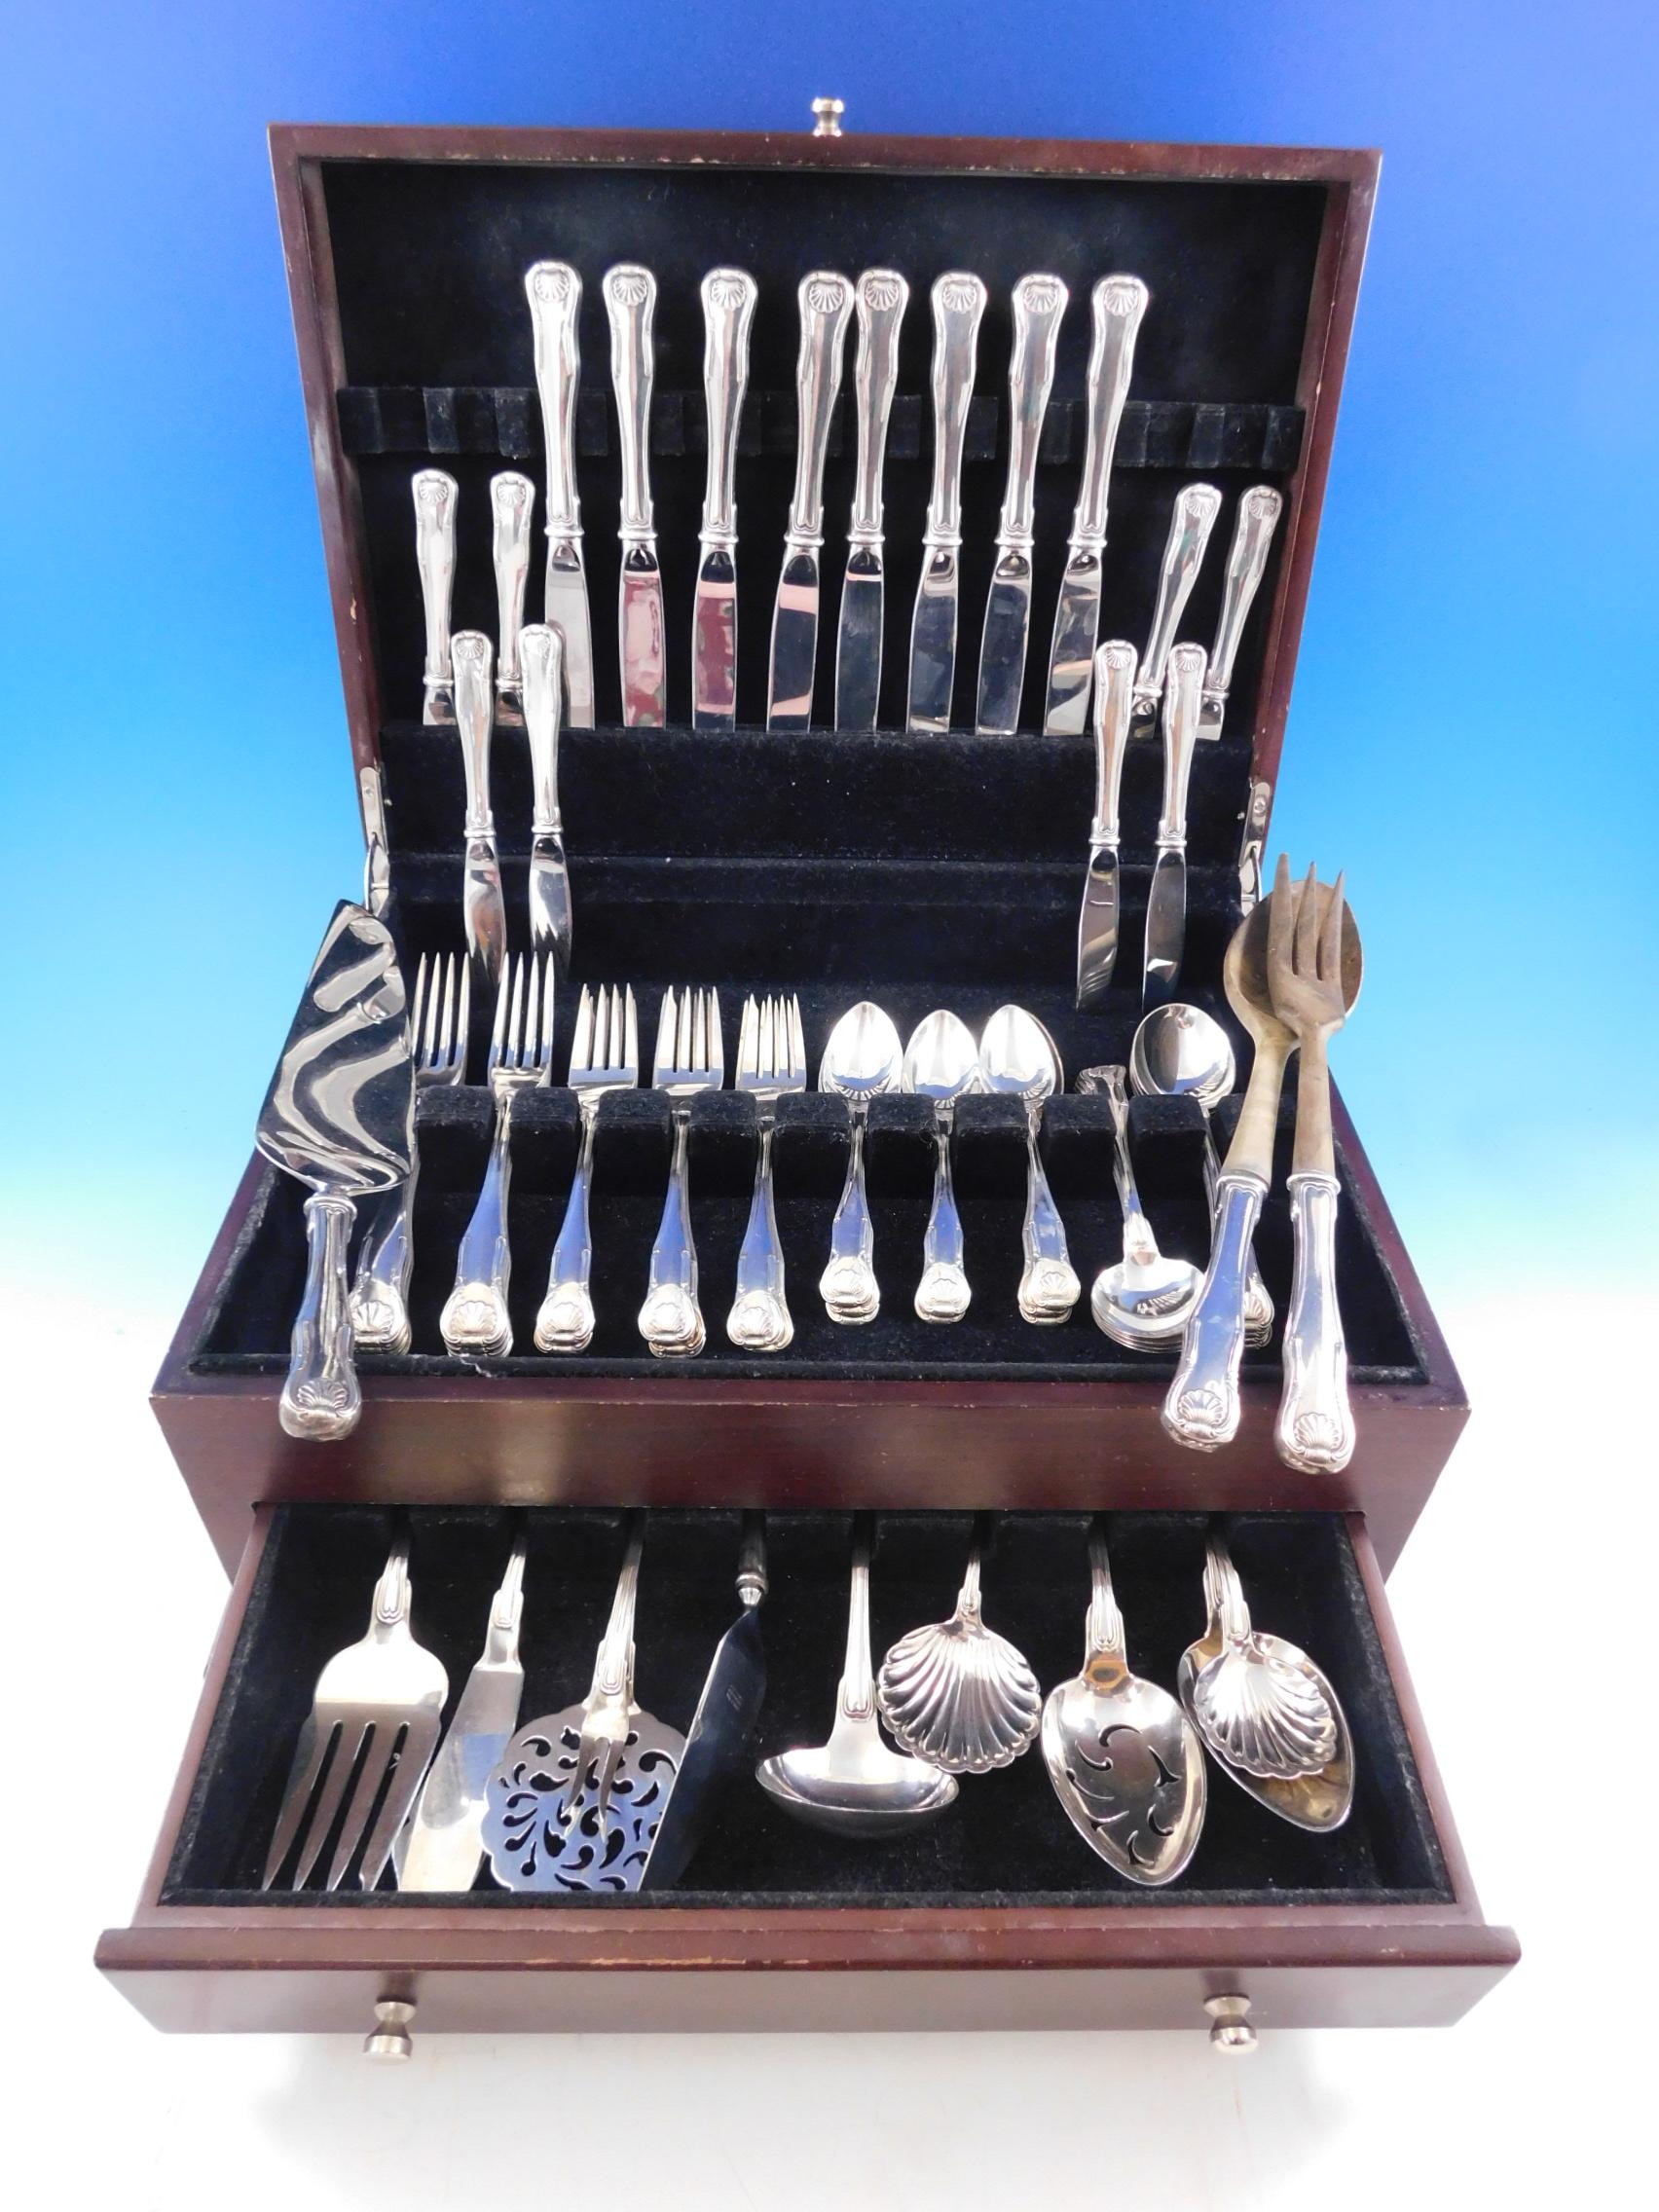 King by Kirk-Stieff sterling silver flatware set - 61 pieces. Kirk-Stieff's version of the traditional Kings-style places its emphasis on simplicity of design, and features an iconic shell motif. This set includes:

8 knives, 8 7/8